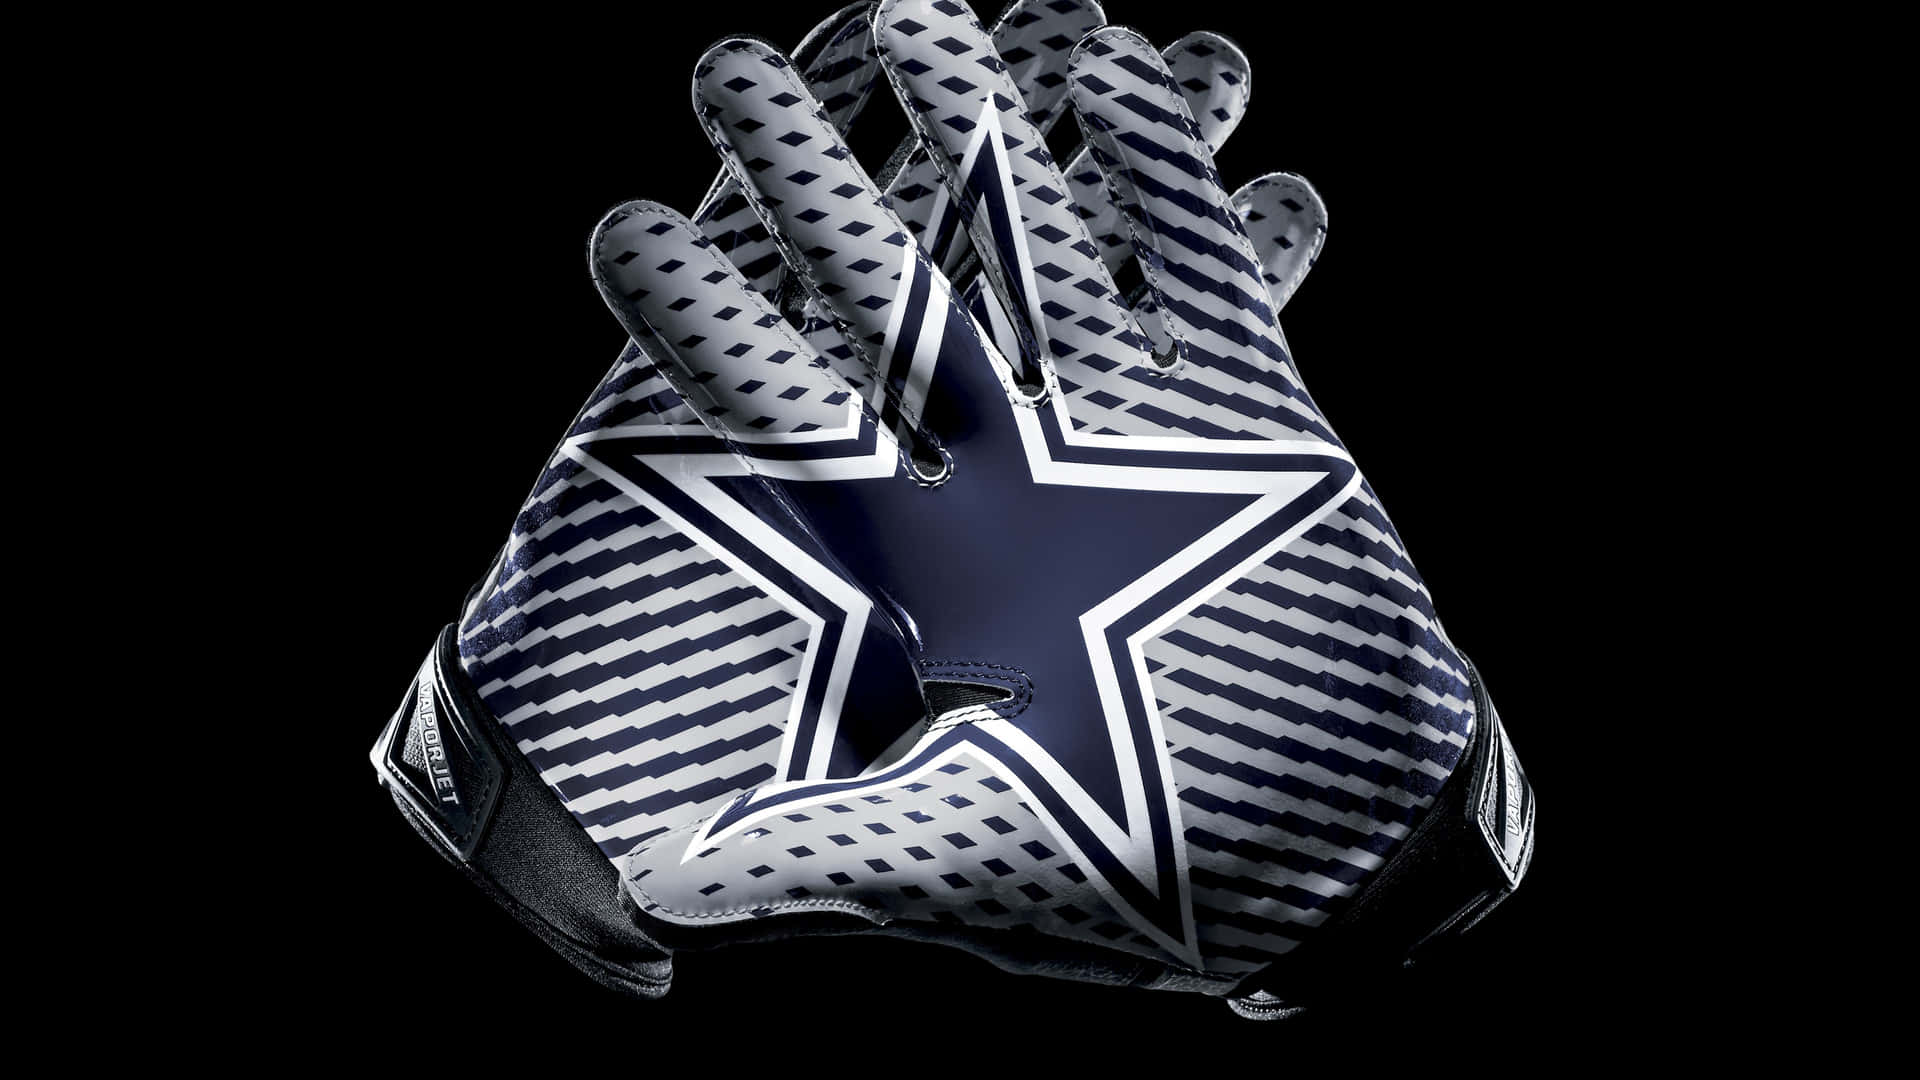 Gloves With Logo Of Dallas Cowboys Iphone Wallpaper